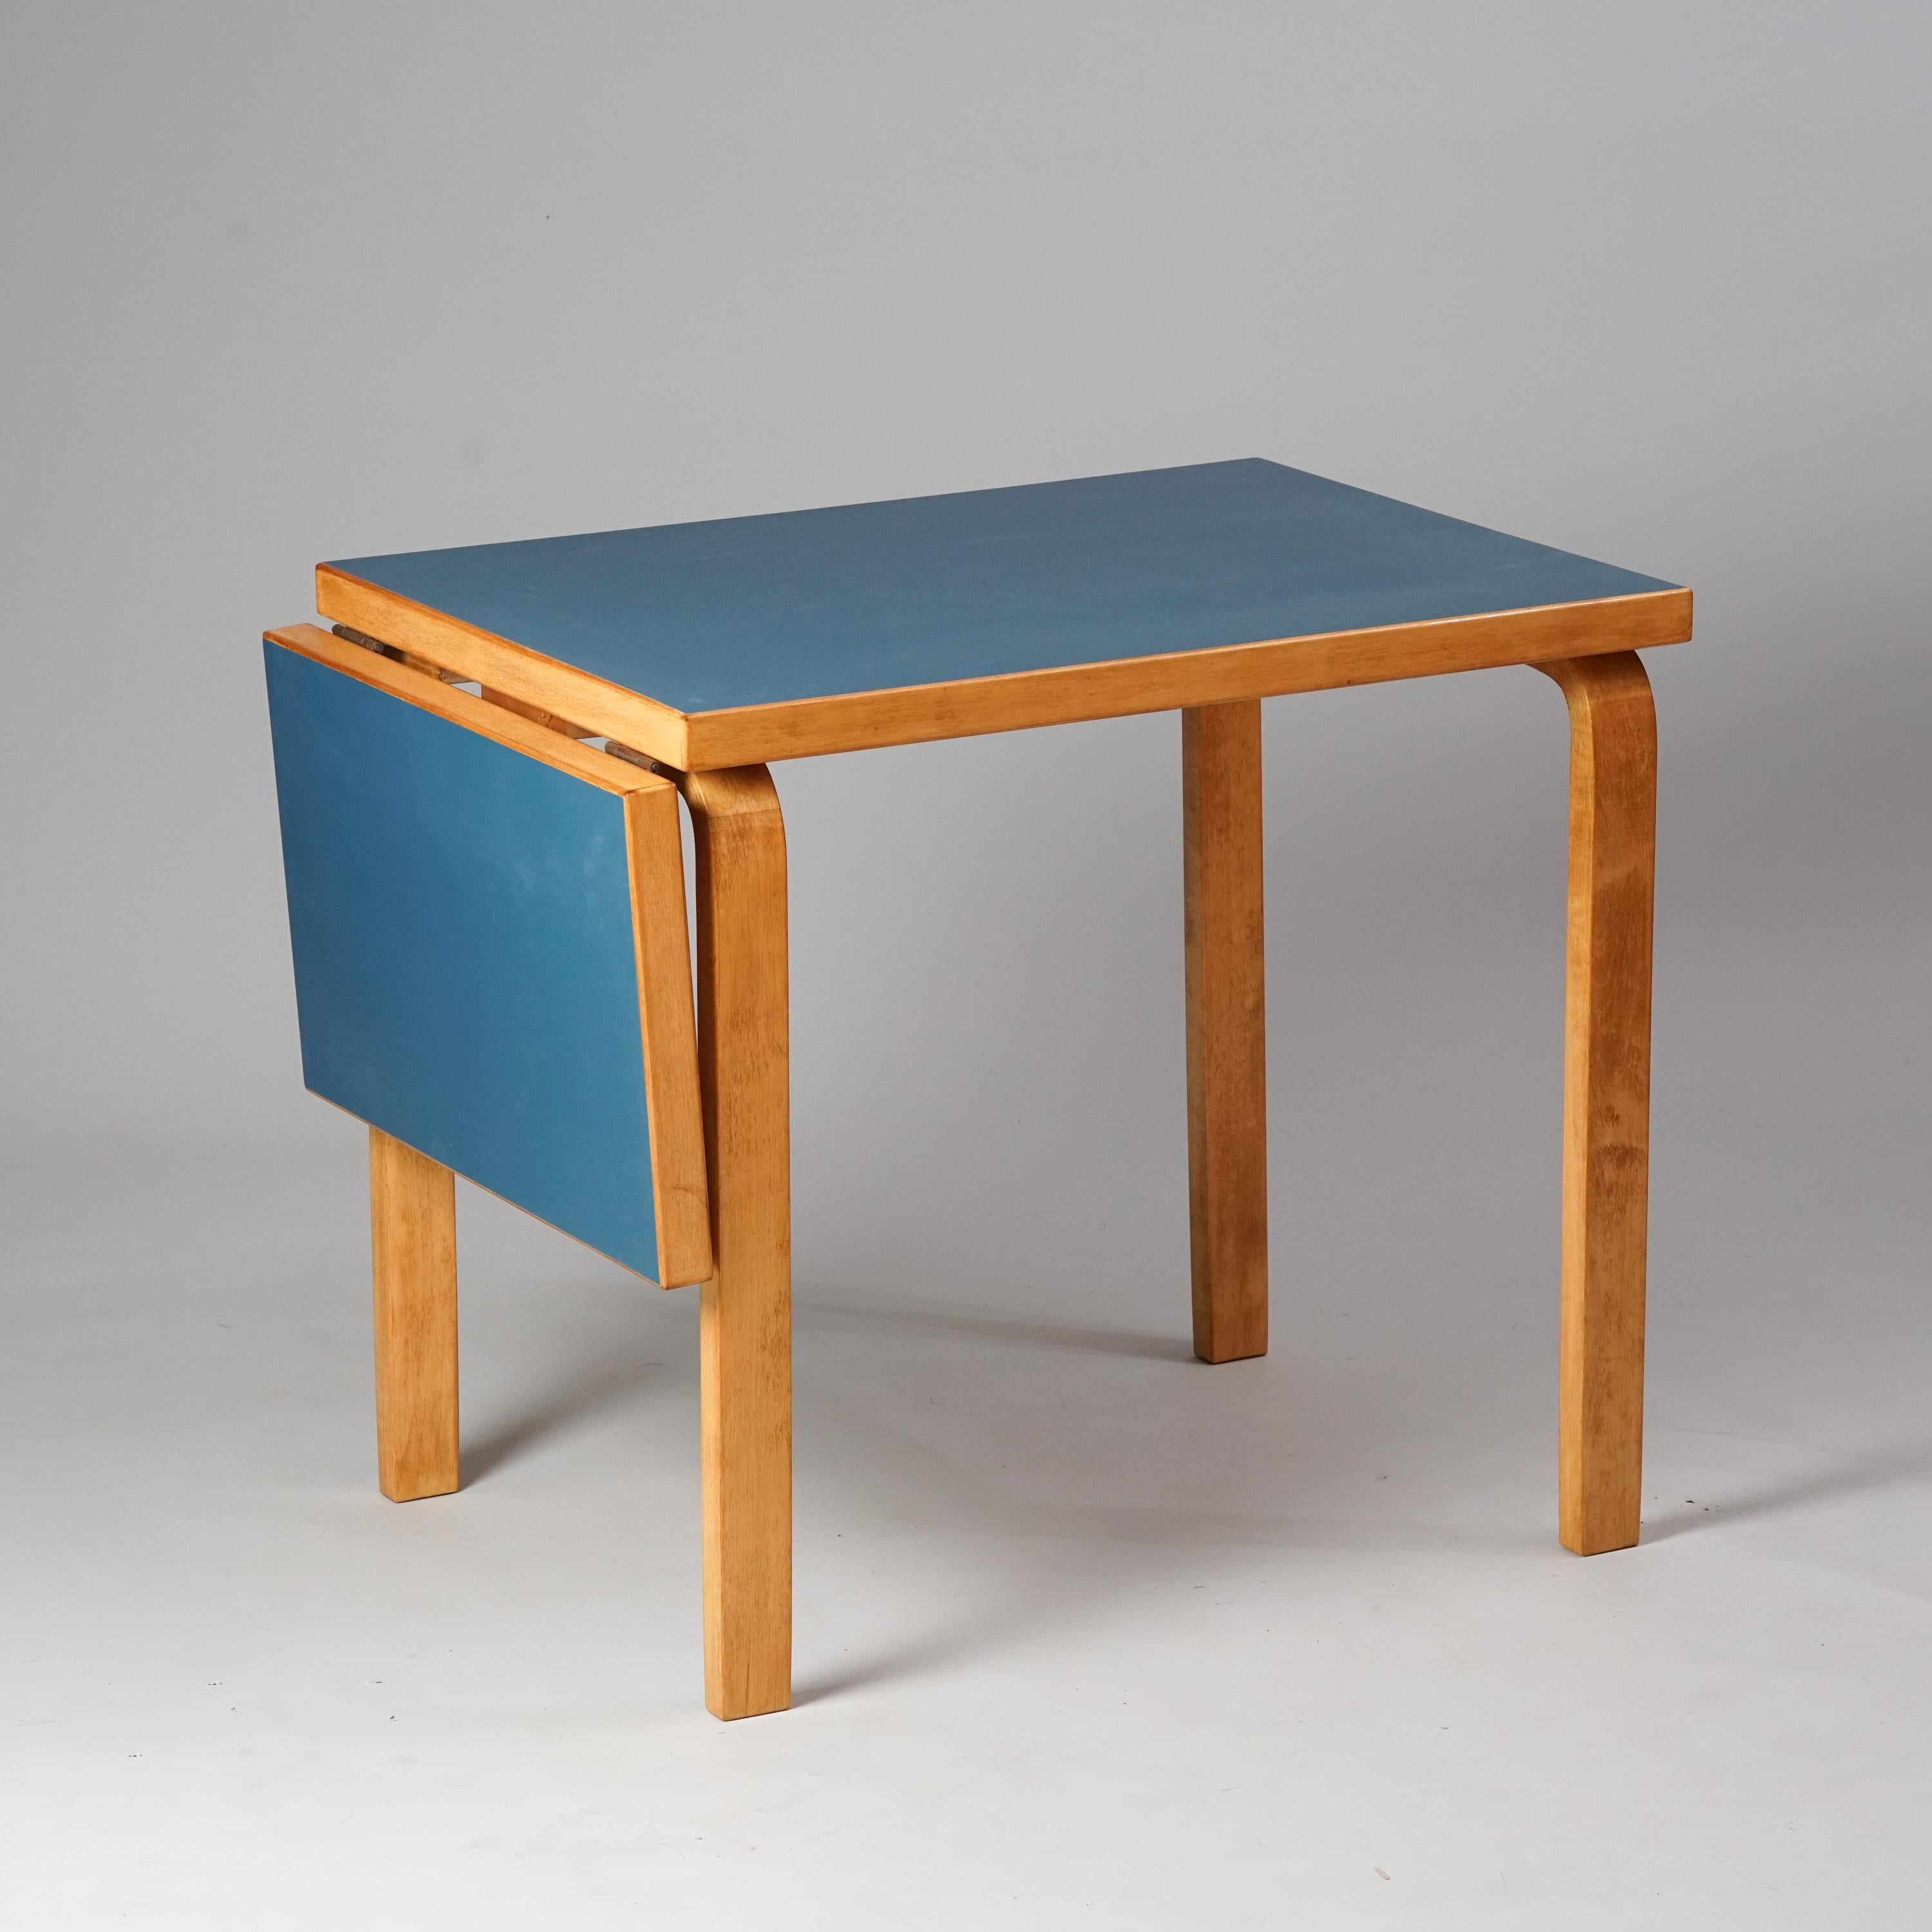 Model DL82 table, designed by Alvar Aalto, manufactured by Oy Huonekalu- ja Rakennustyötehdas Ab, 1950s. Birch with linoleum table top. The table has an extendable part that can be fold to the side. Good vintage condition, minor patina consistent